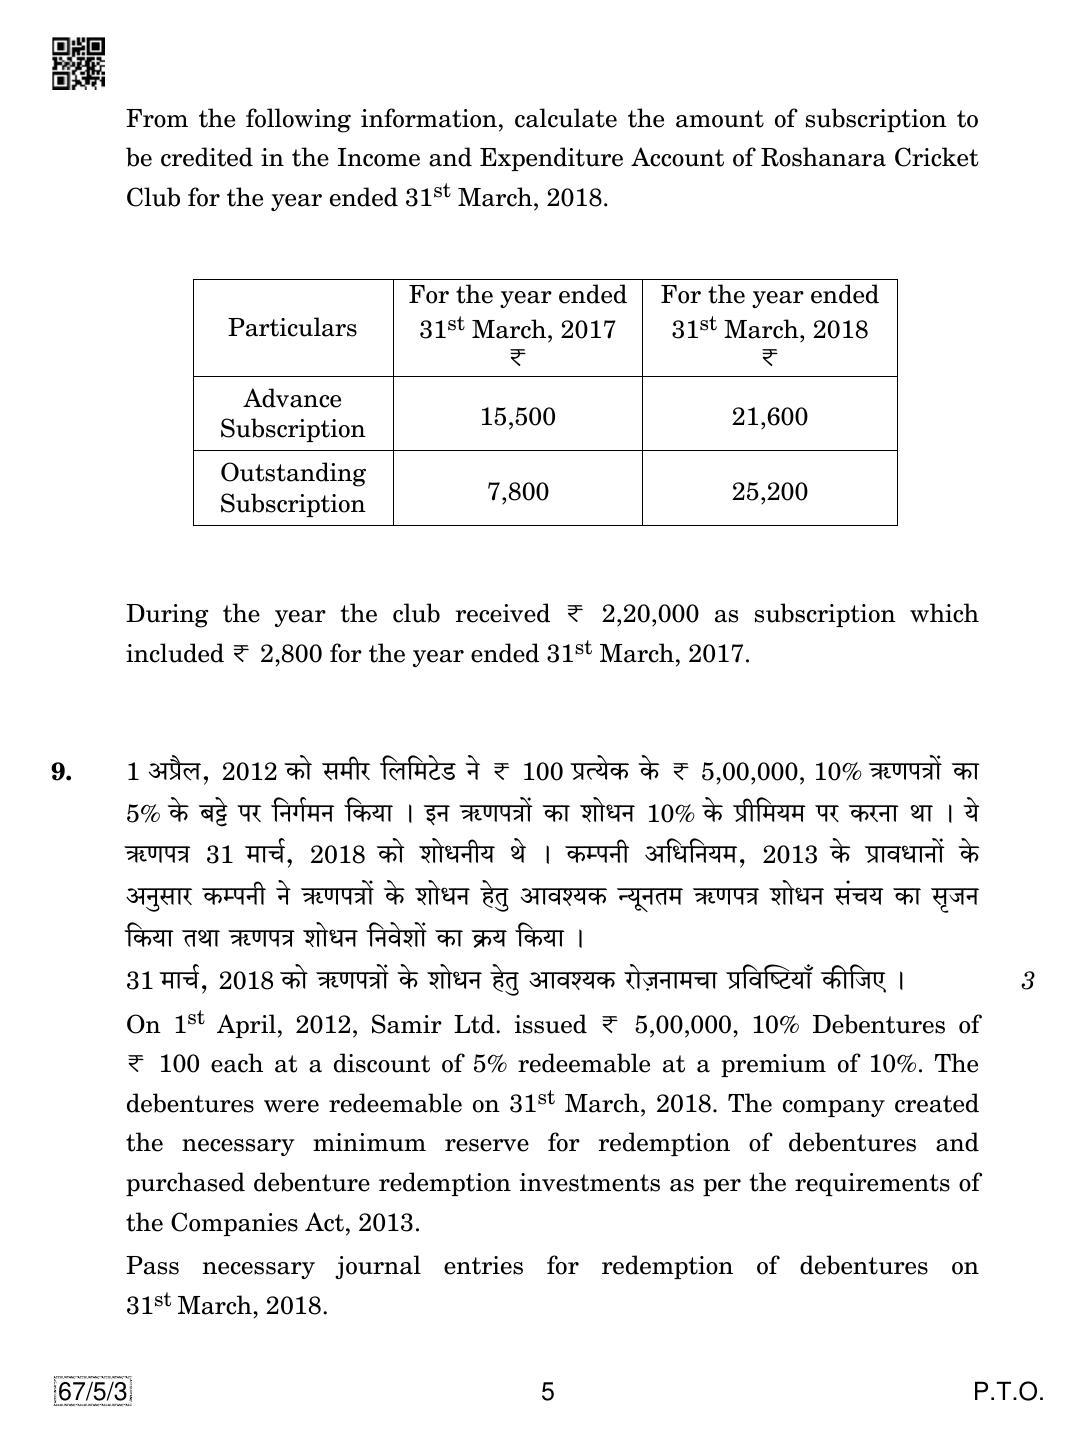 CBSE Class 12 67-5-3 Accountancy 2019 Question Paper - Page 5